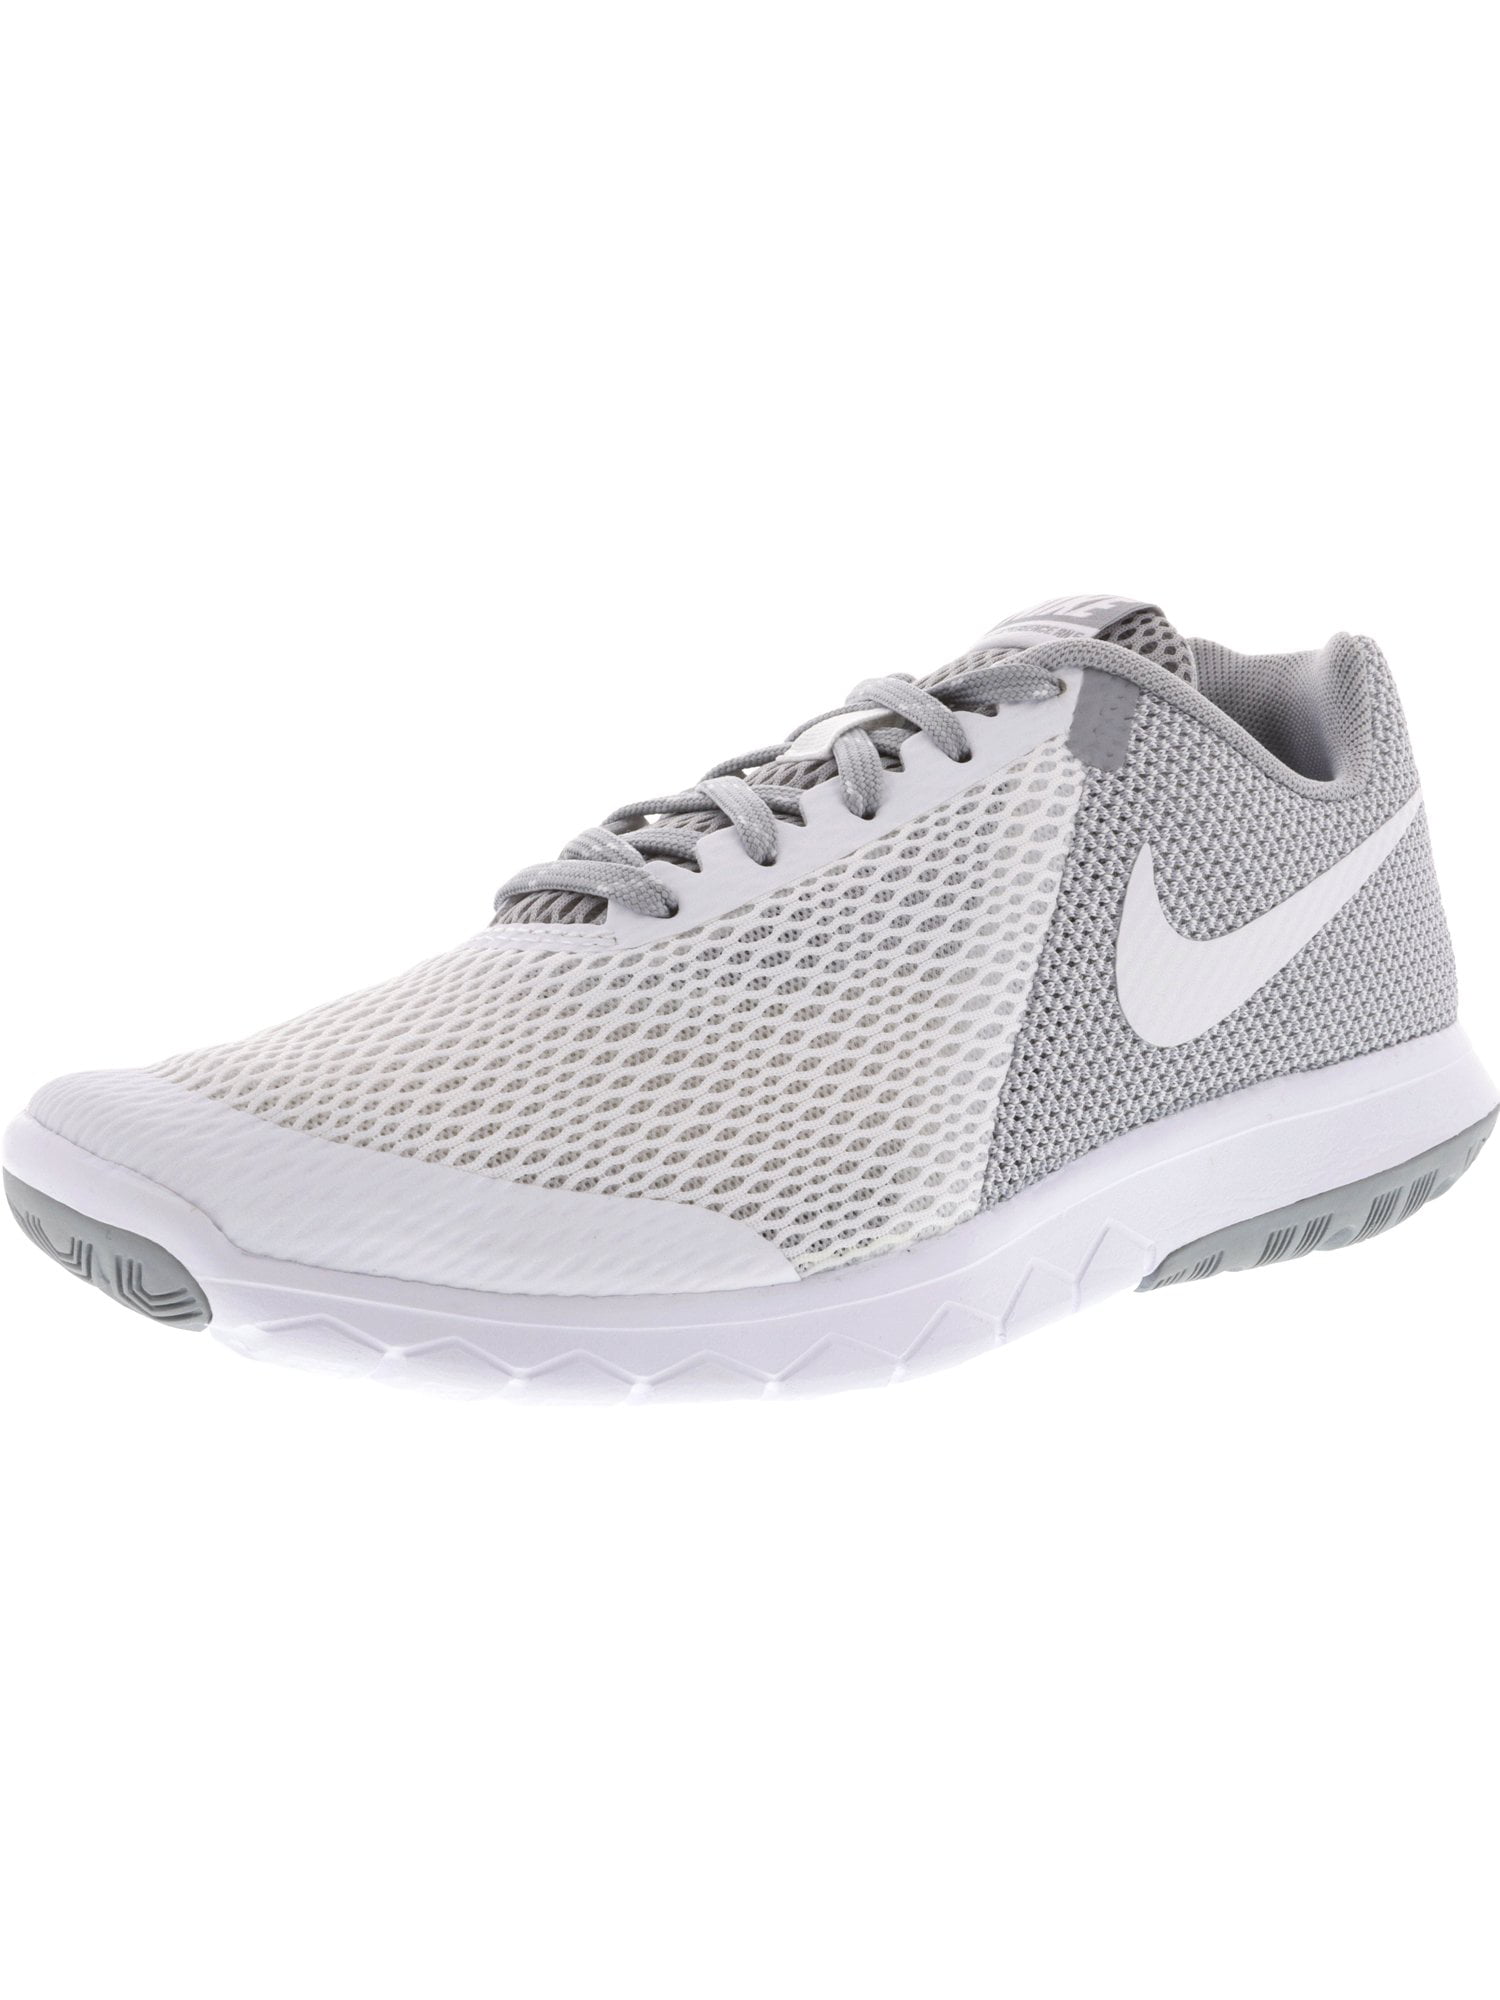 Complacer Alrededor Clancy Nike Women's Flex Experience Rn 5 White / White-Wolf Grey Ankle-High Fabric Running  Shoe - 8.5M - Walmart.com